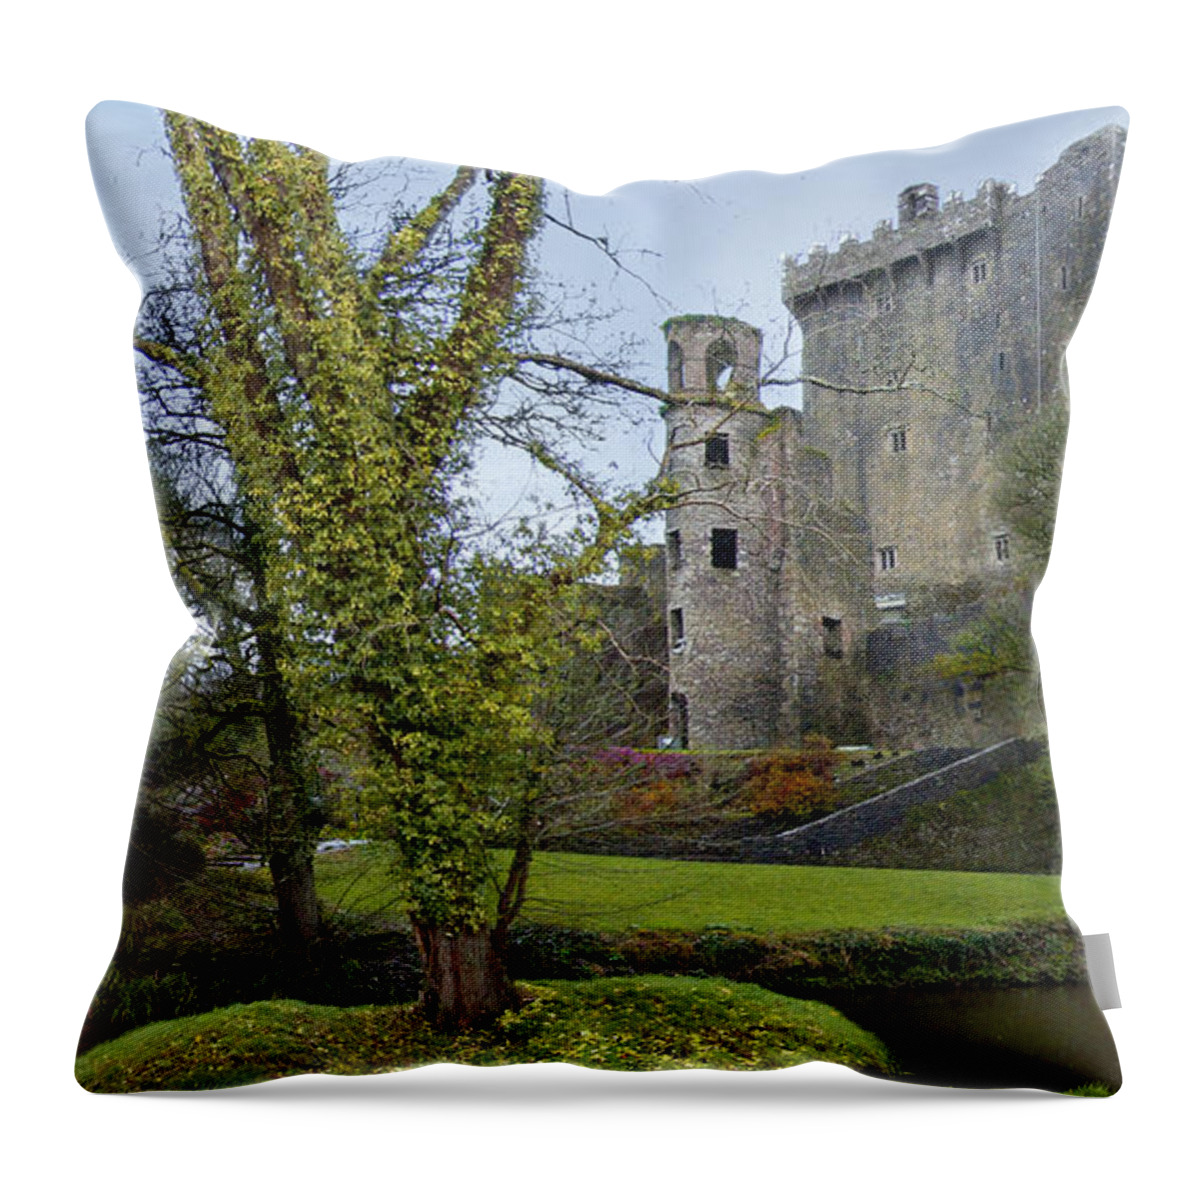 Ireland Throw Pillow featuring the photograph Blarney Castle 3 by Mike McGlothlen